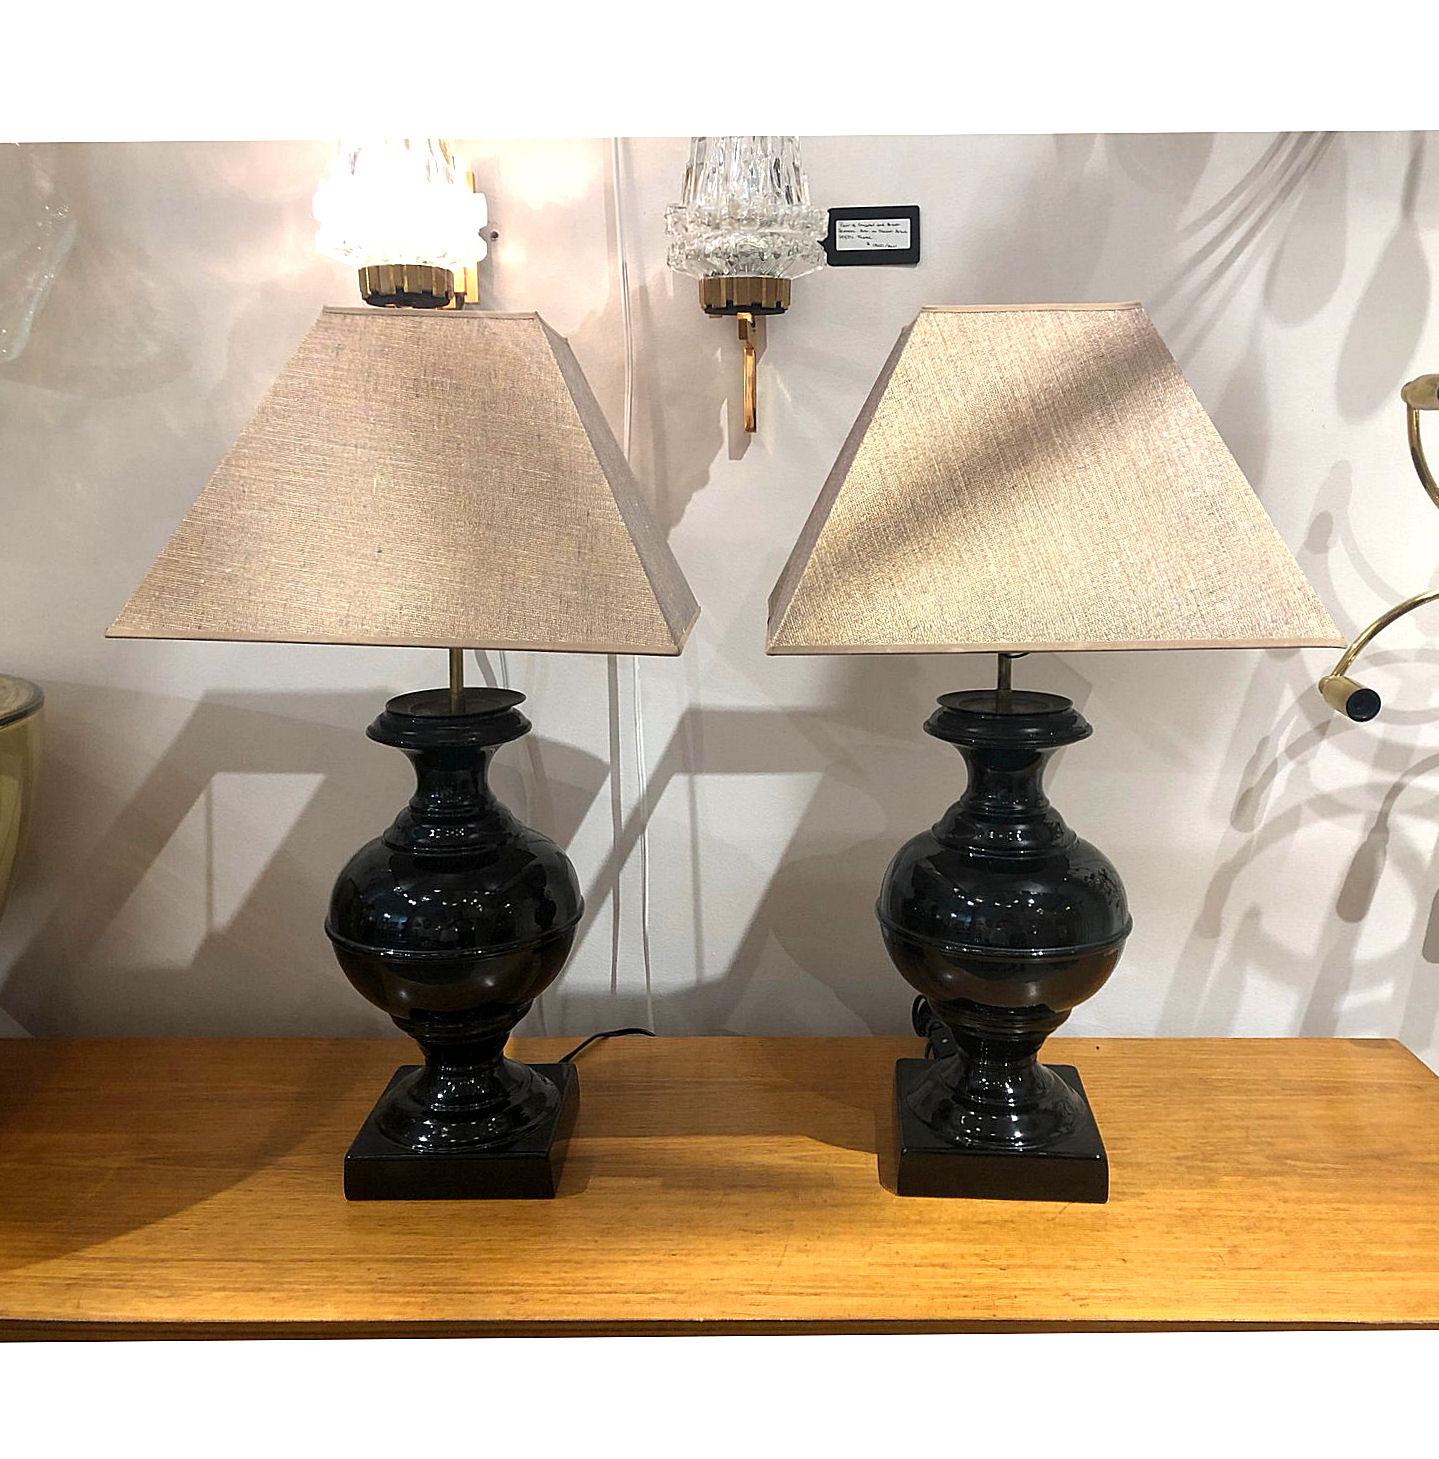 Classic looking Mid-Century Modern black ceramic lamps.
New shades, with metallic luster. Sold together.
France, 1960s.
Signed, unidentified artist.
Dimensions with shades: 14